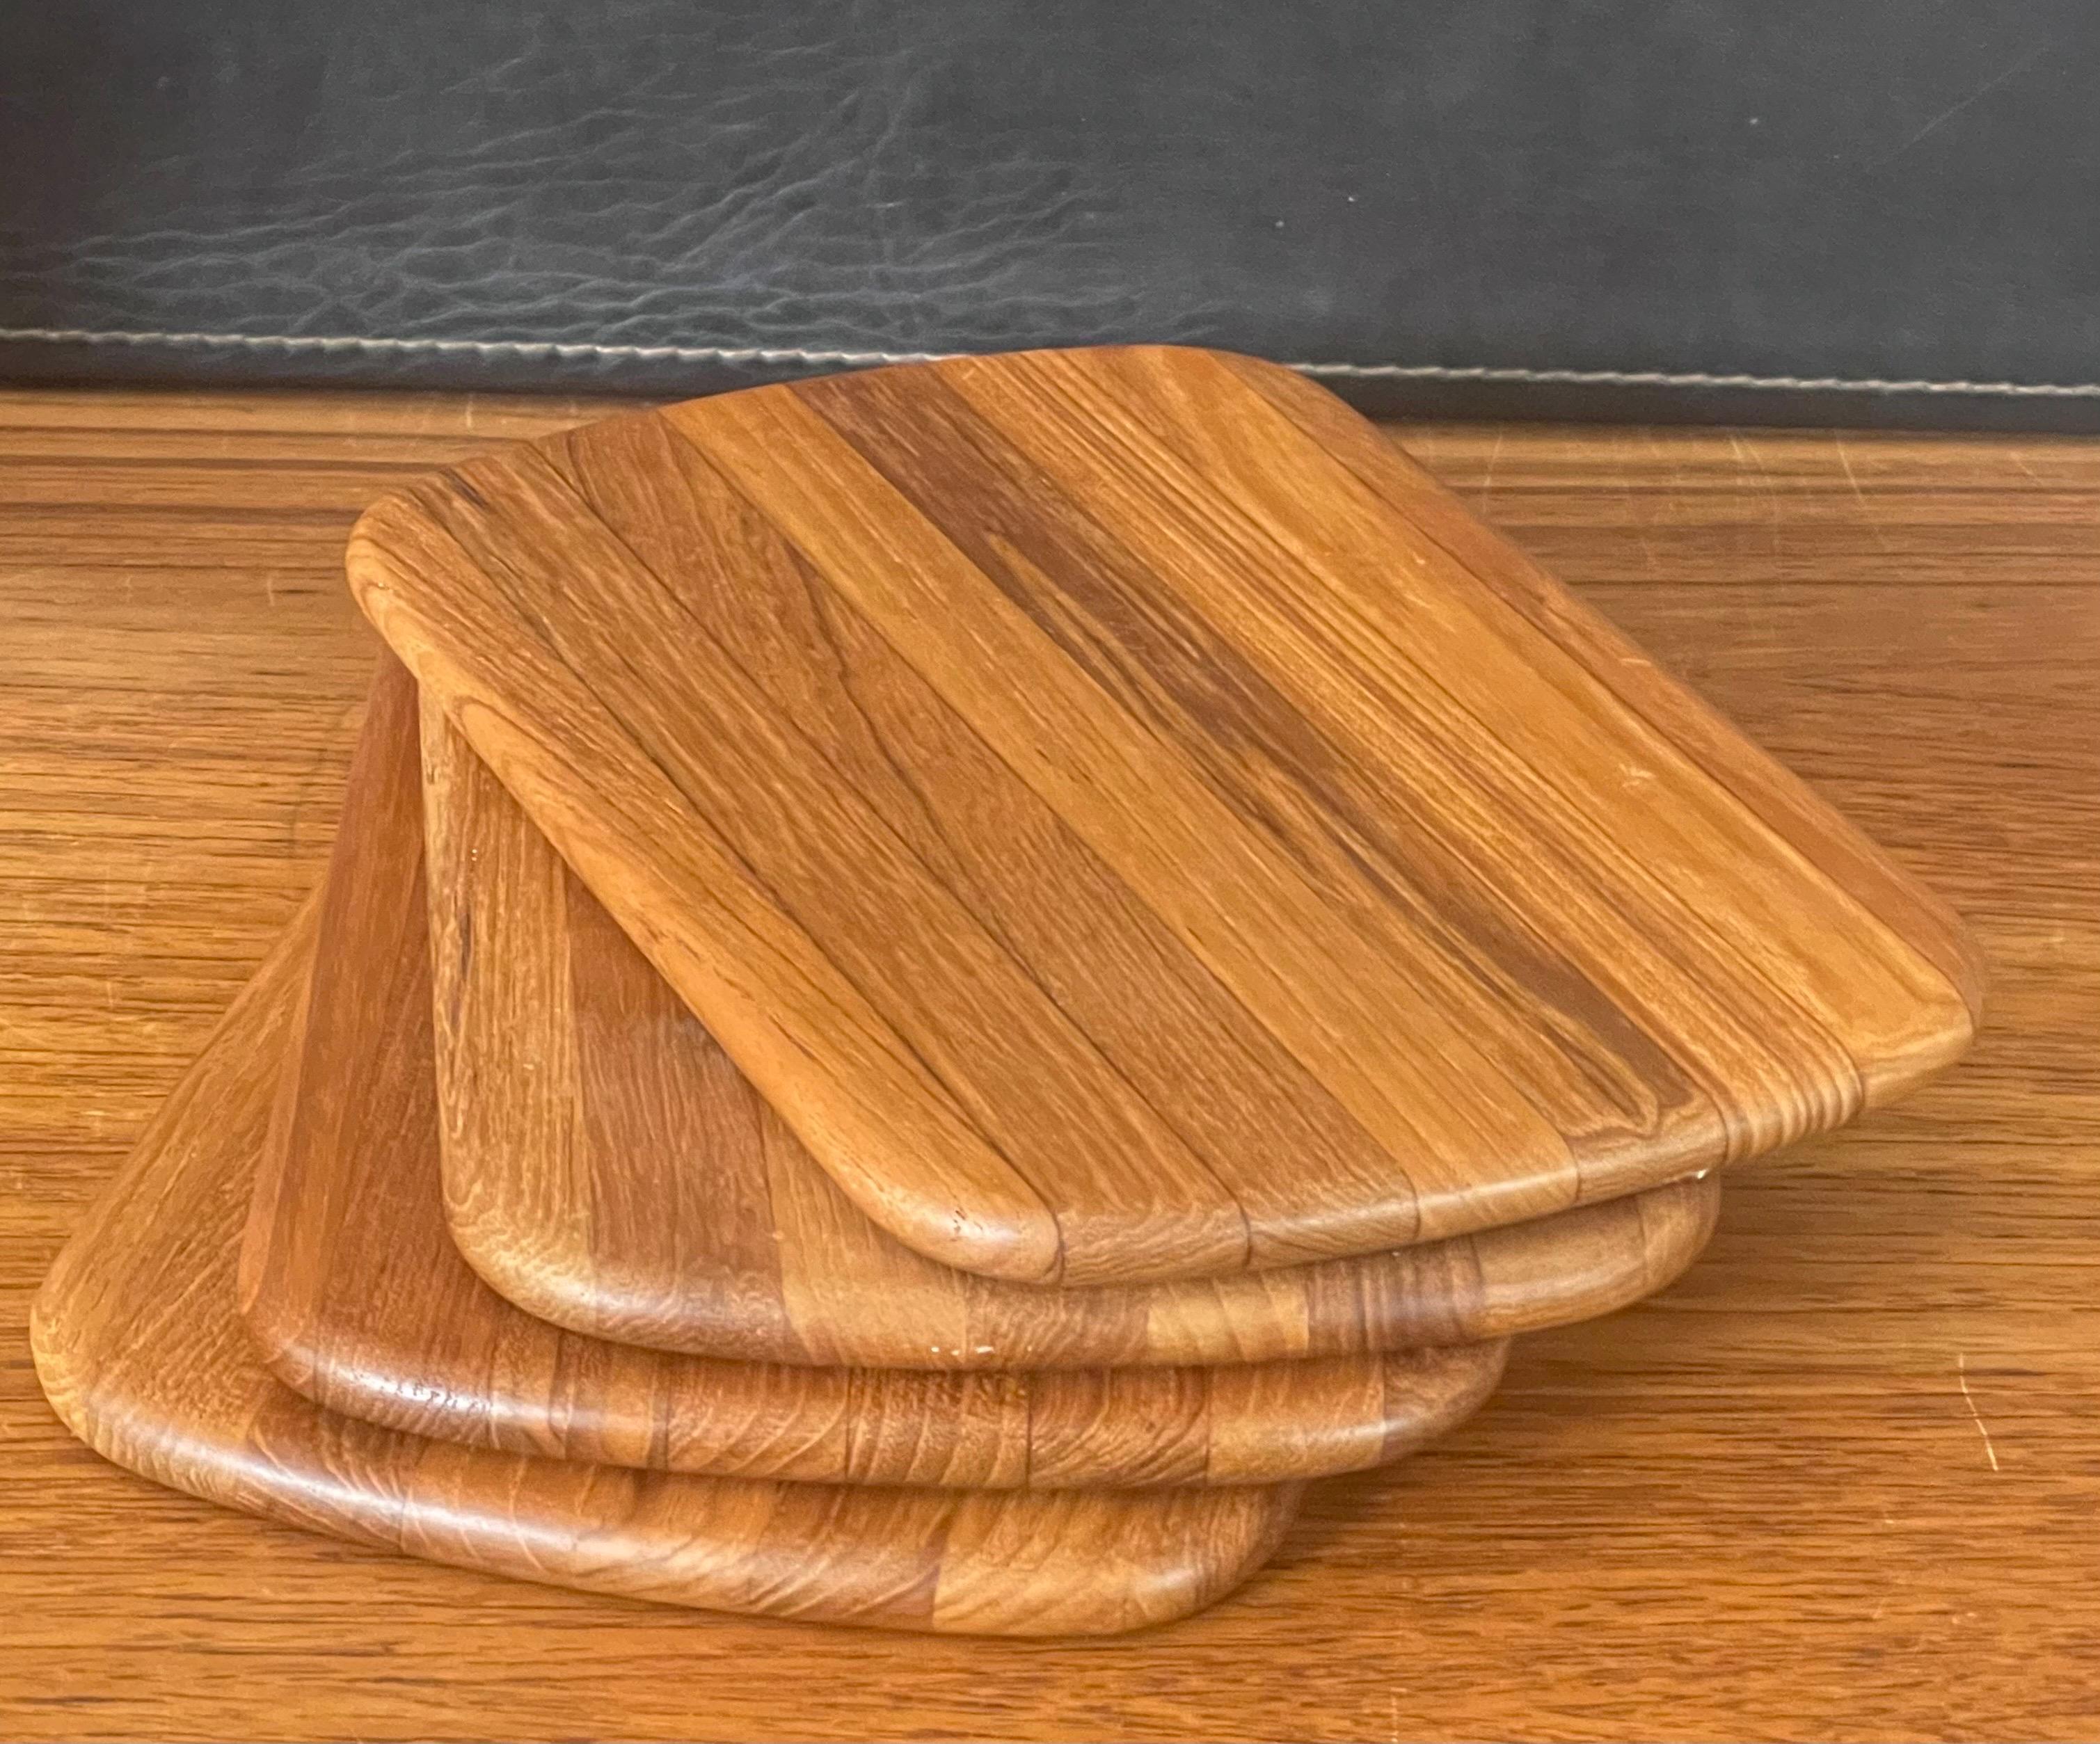 Set of four petite Danish modern teak butcher block cutting board / cheese tray with rounded edges, circa 1970s. The rectangle cutting boards are in great vintage condition (appear to be very lightly used, if at all) and measure 8.5